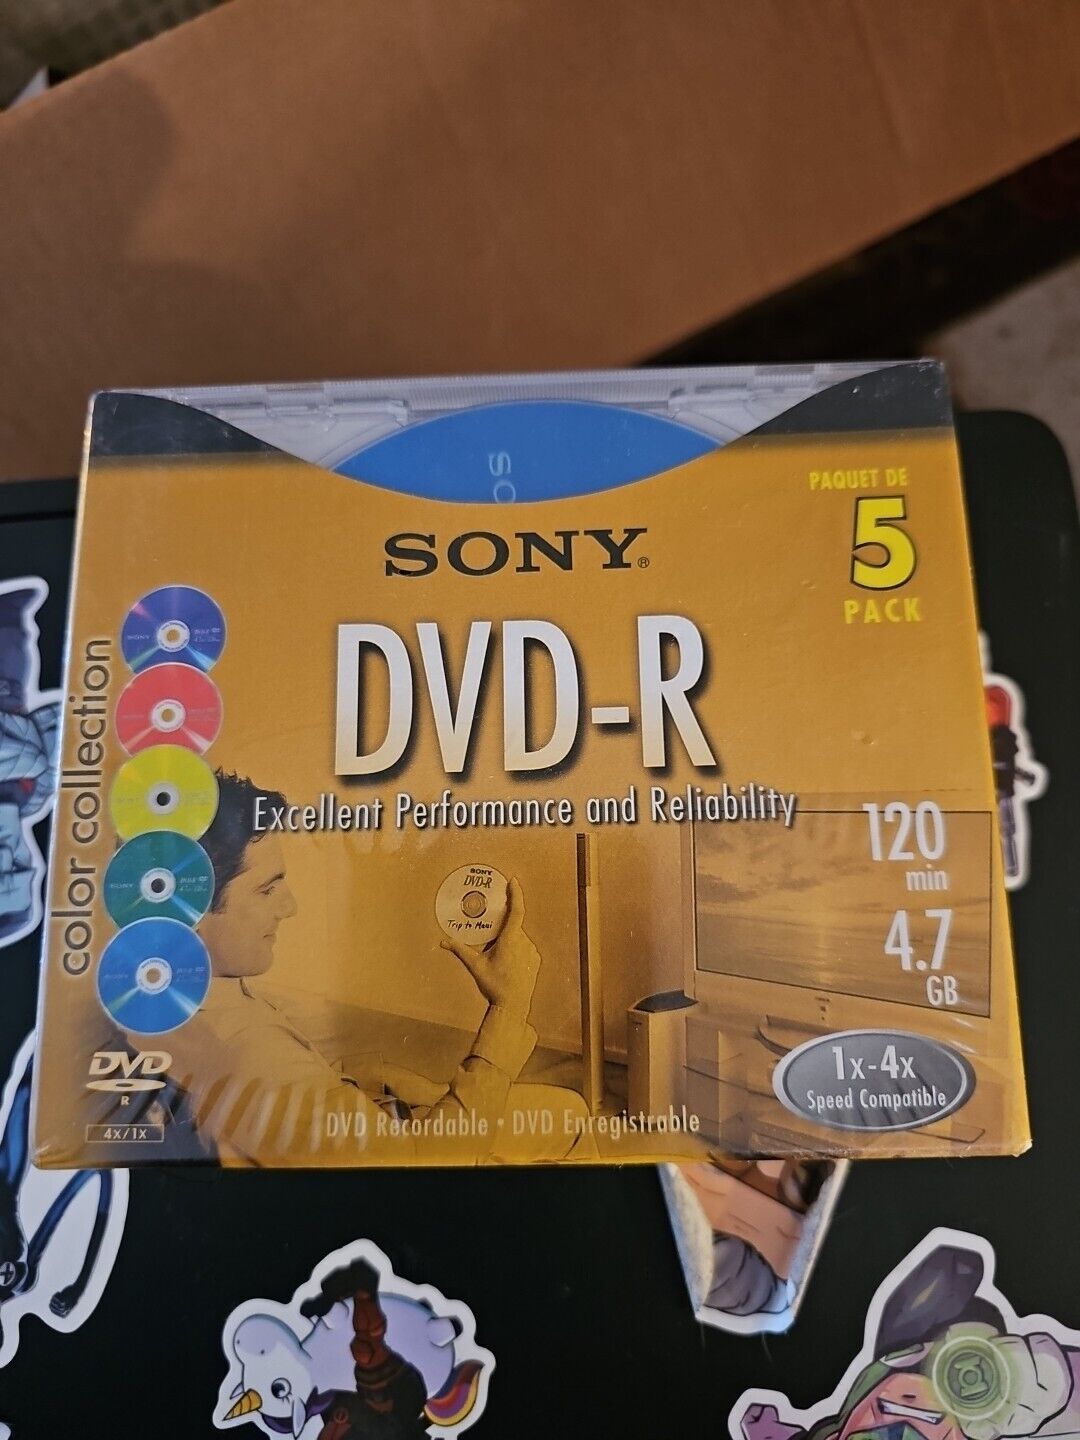 SONY DVD-R Color Collection 5 Pack 1x - 4x speed Recordable w/ Jewel Case NEW